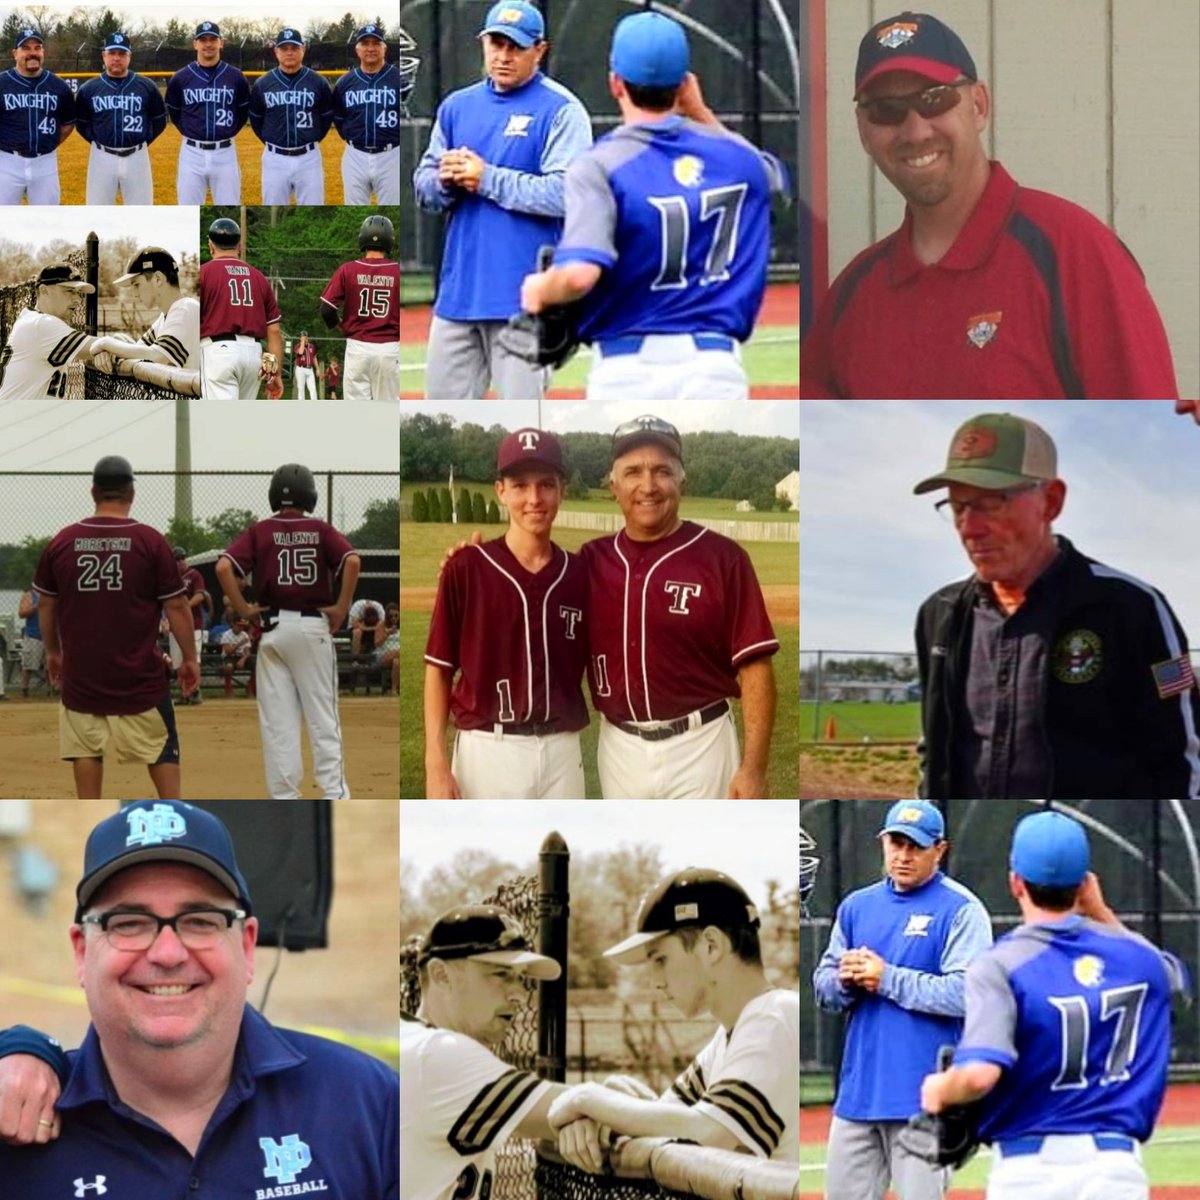 #NationalCoachesDay @lefty1530 has been very fortunate to have some of the best - From Little League all the way up to college. @NPKnights @FrankFty11 @Misericordia_BB @JOEDIESEL55 @buckscobaseball @CATZ19BU @popsswannie @bwbealer @PaulMoretski